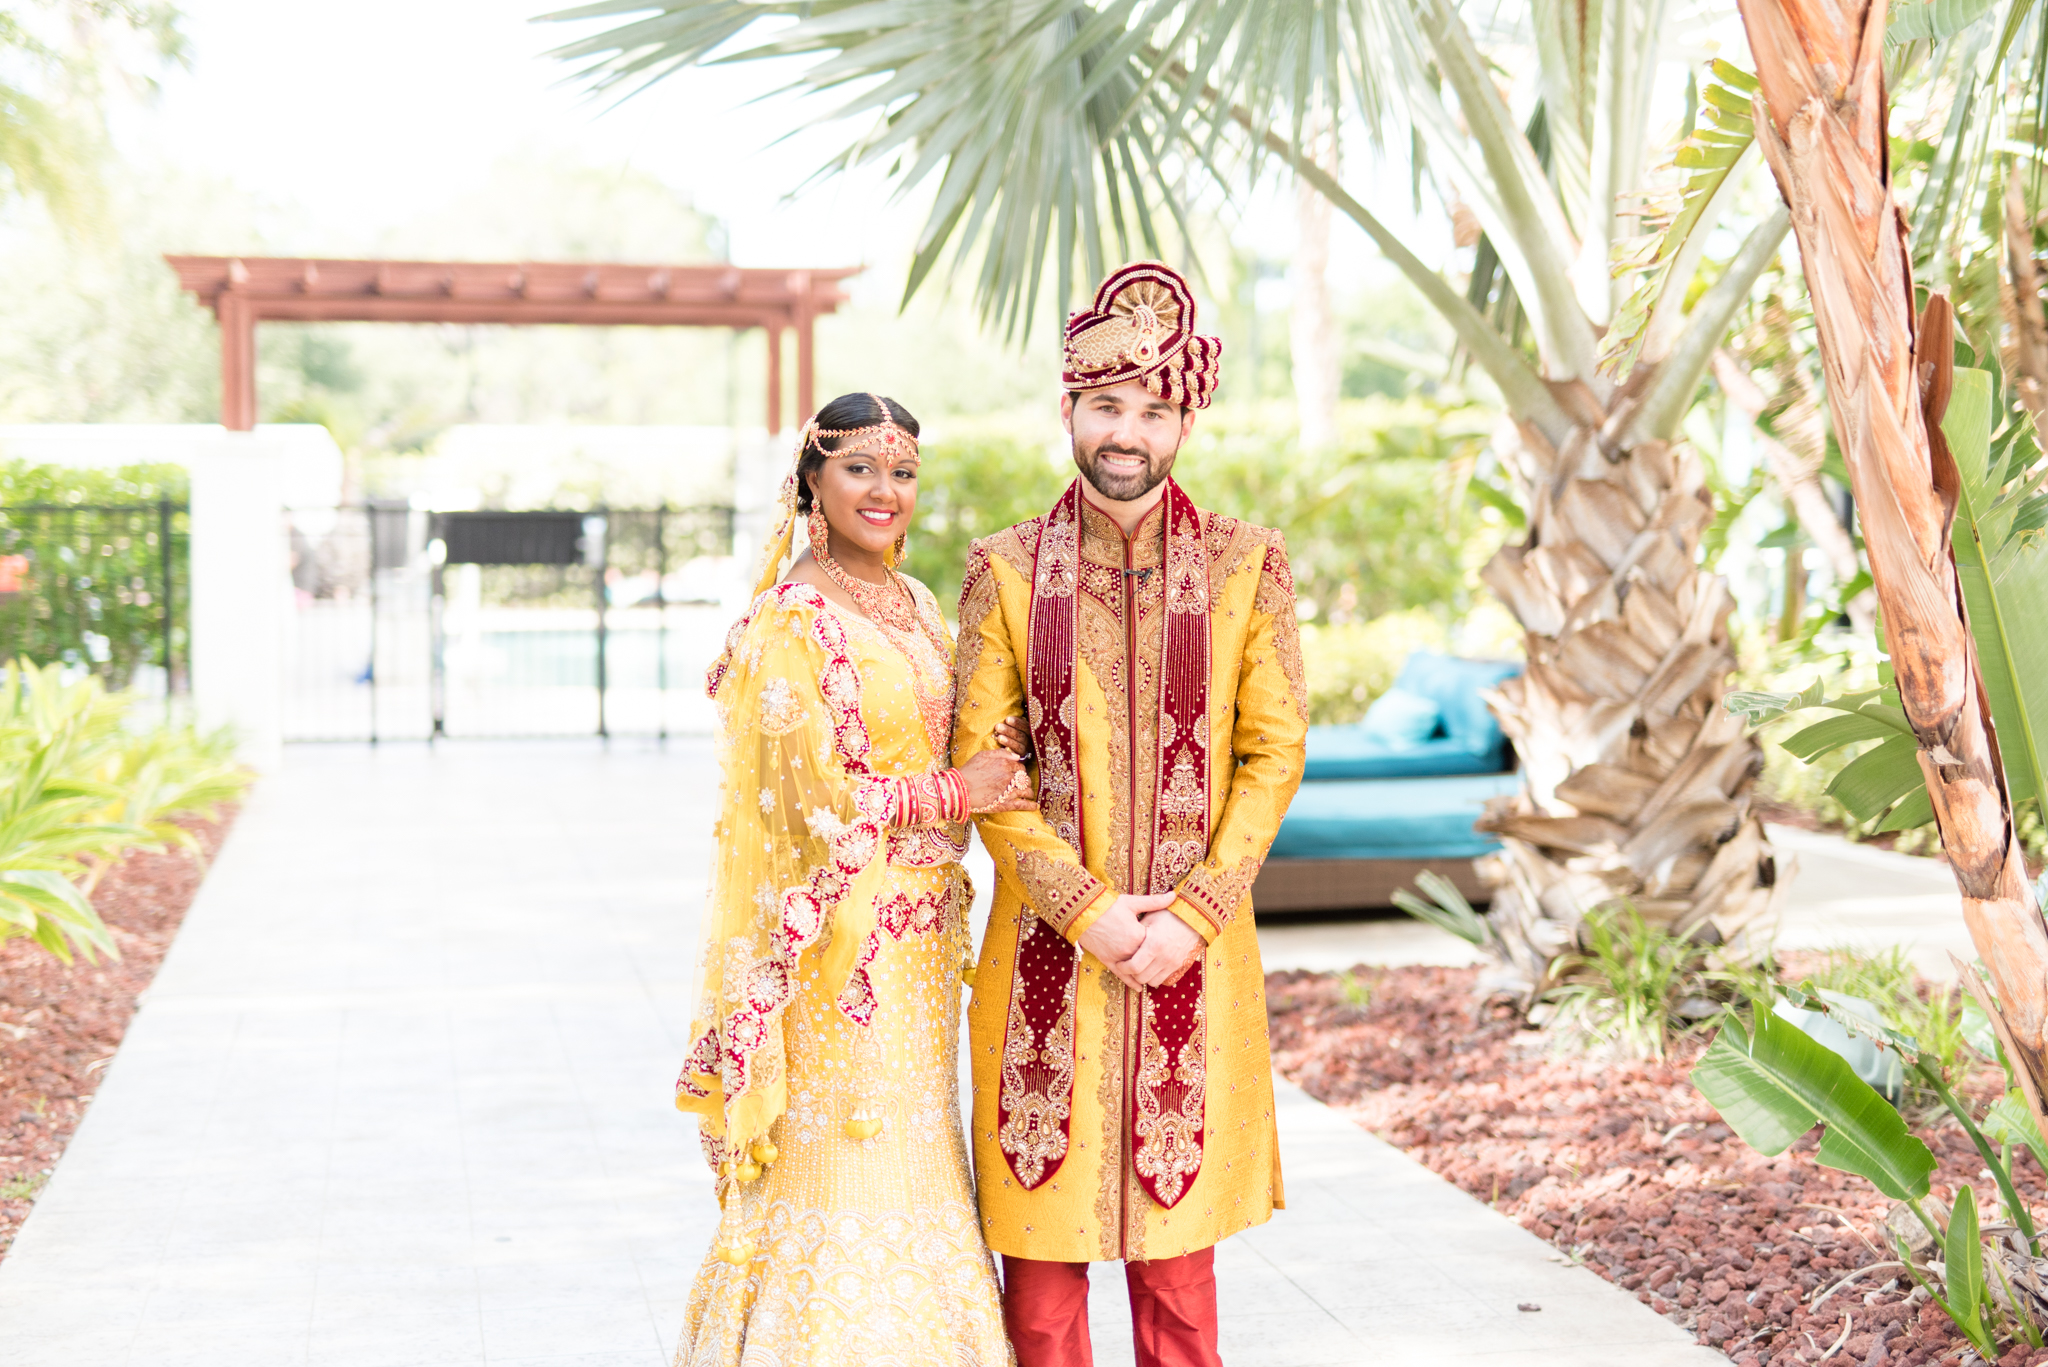 Indian Bride and groom smile at the camera.